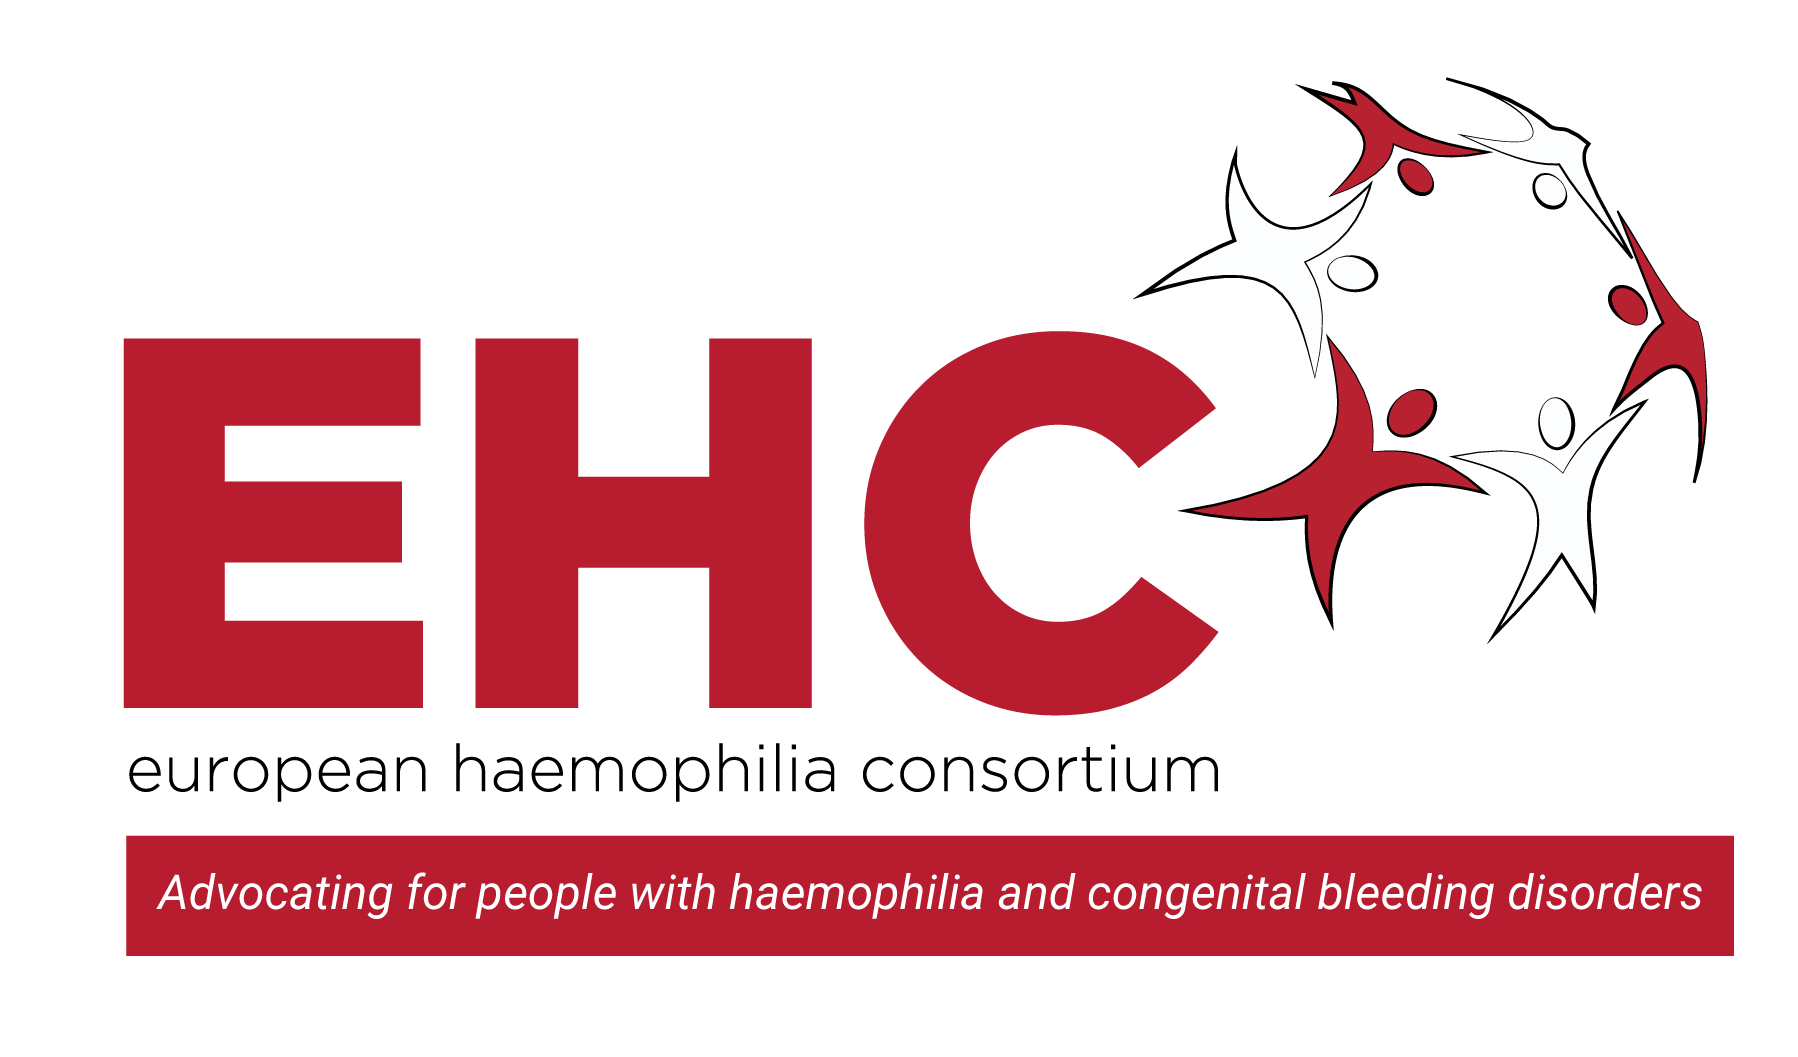 EHC – European Haemophilia Consortium - Advocating for people with haemophilia and congenital bleeding disorders - /date-for-the-ehc-round-table-on-mild-haemophilia-changed-to-30-november/